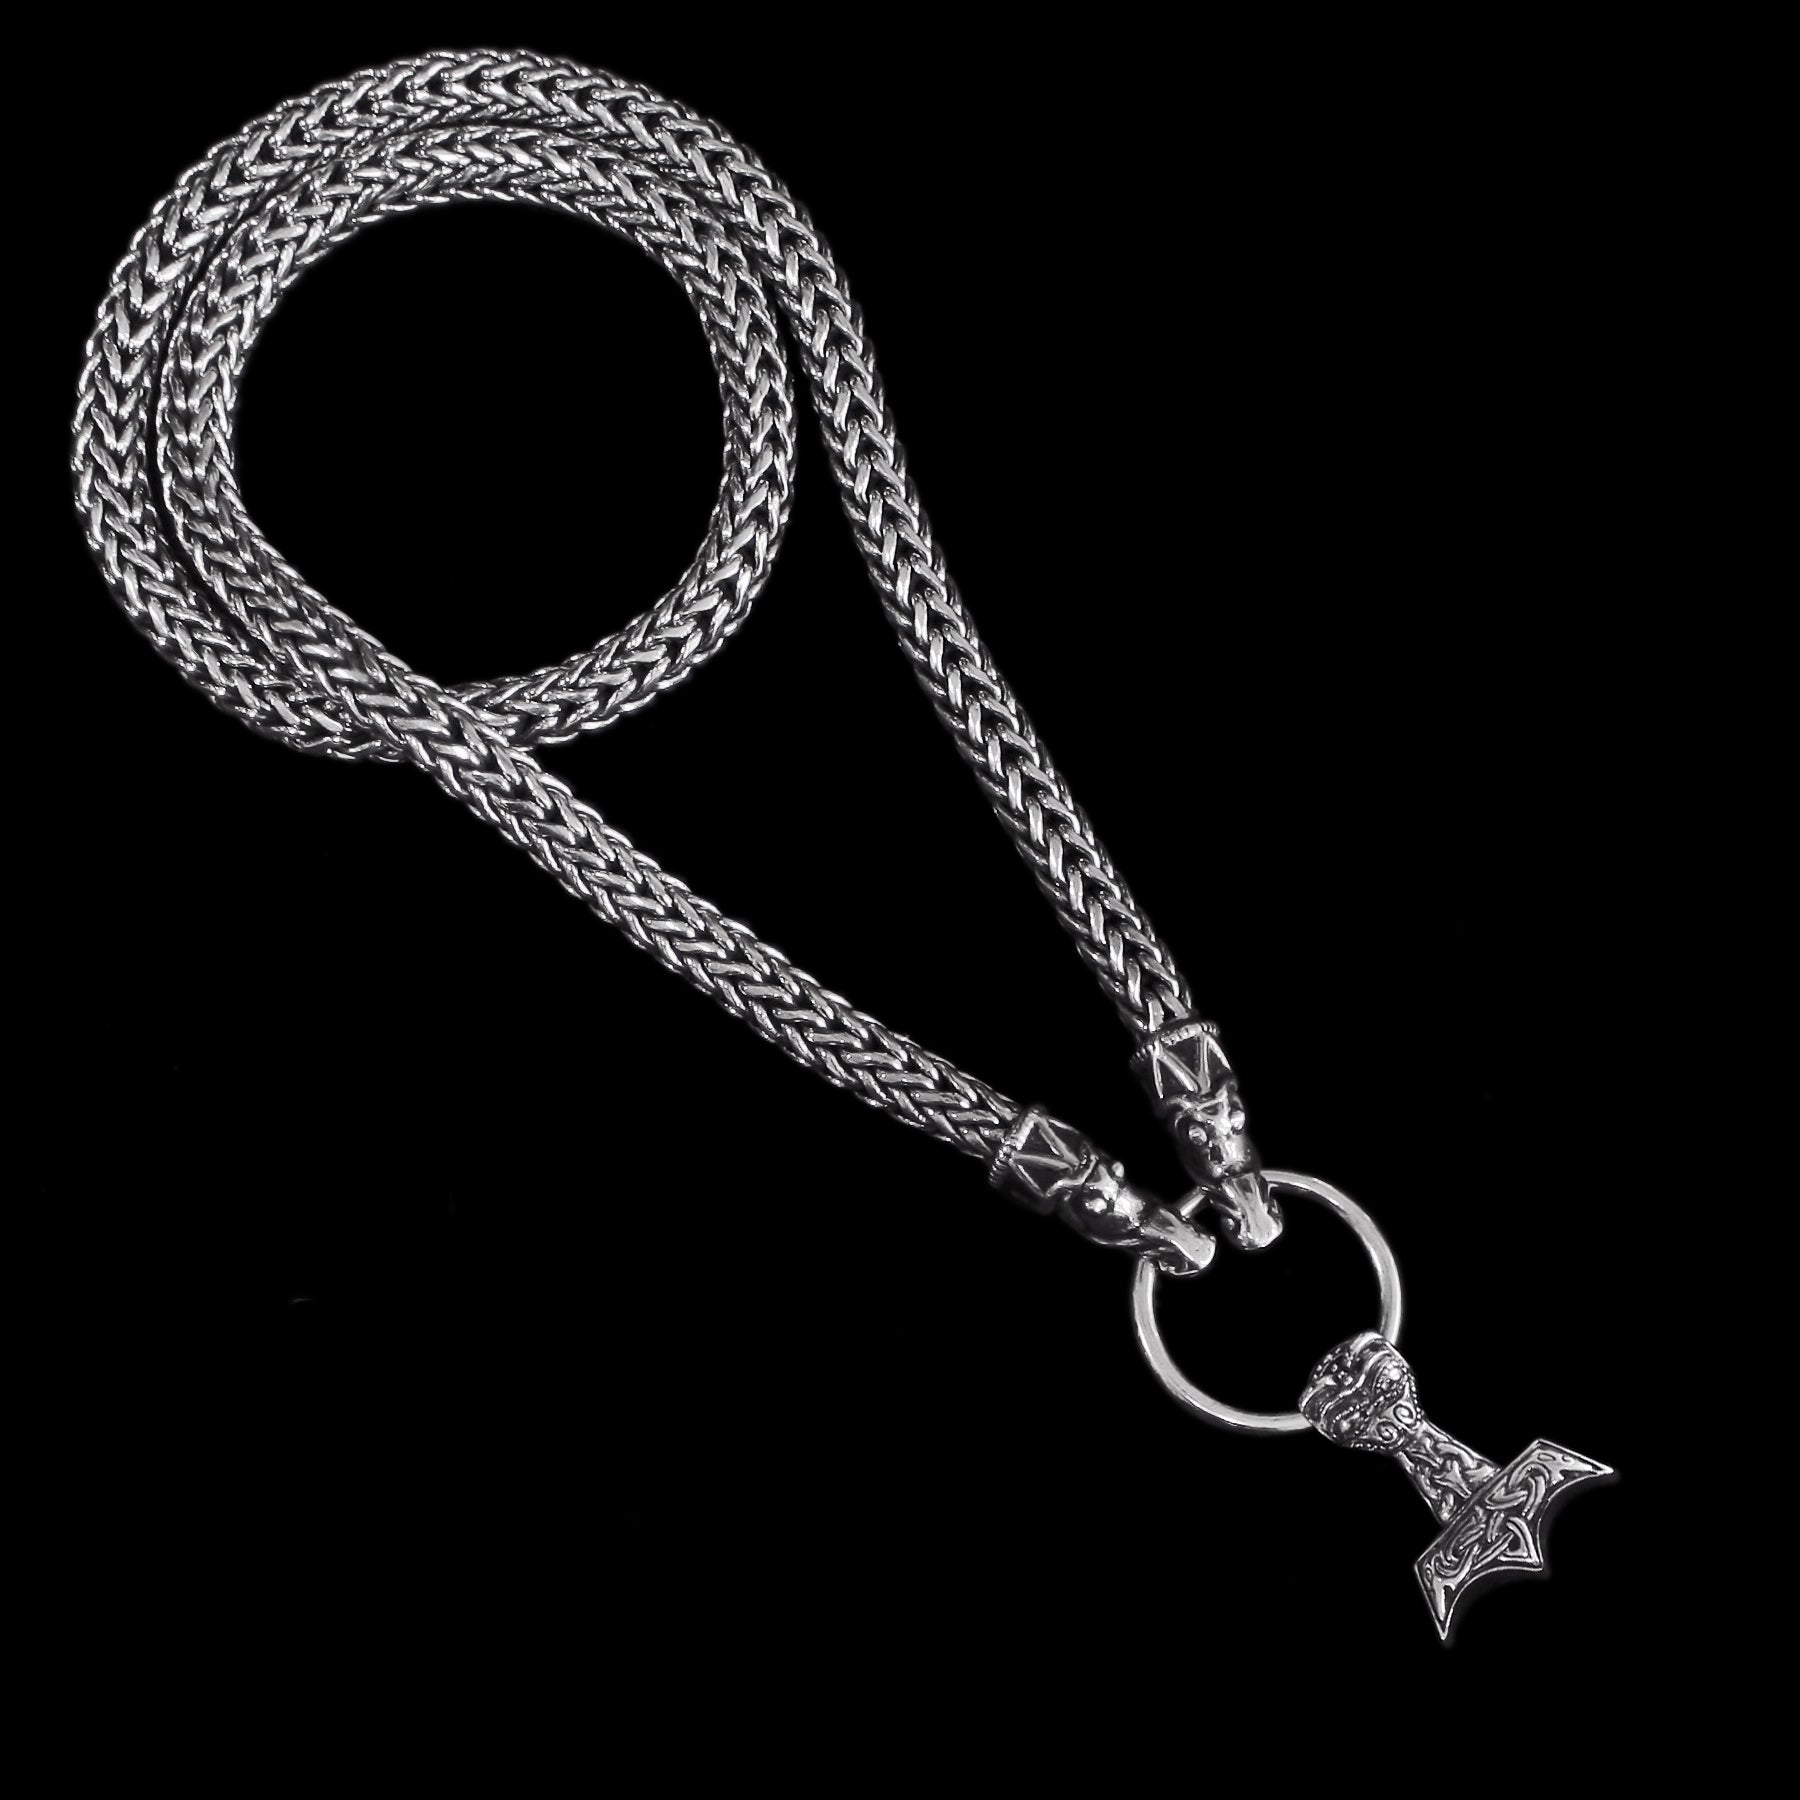 8mm Thick Silver Snake Chain Thors Hammer Necklace - Gotland Dragon Heads - Splt Ring - Ferocious Beast Thors Hammer